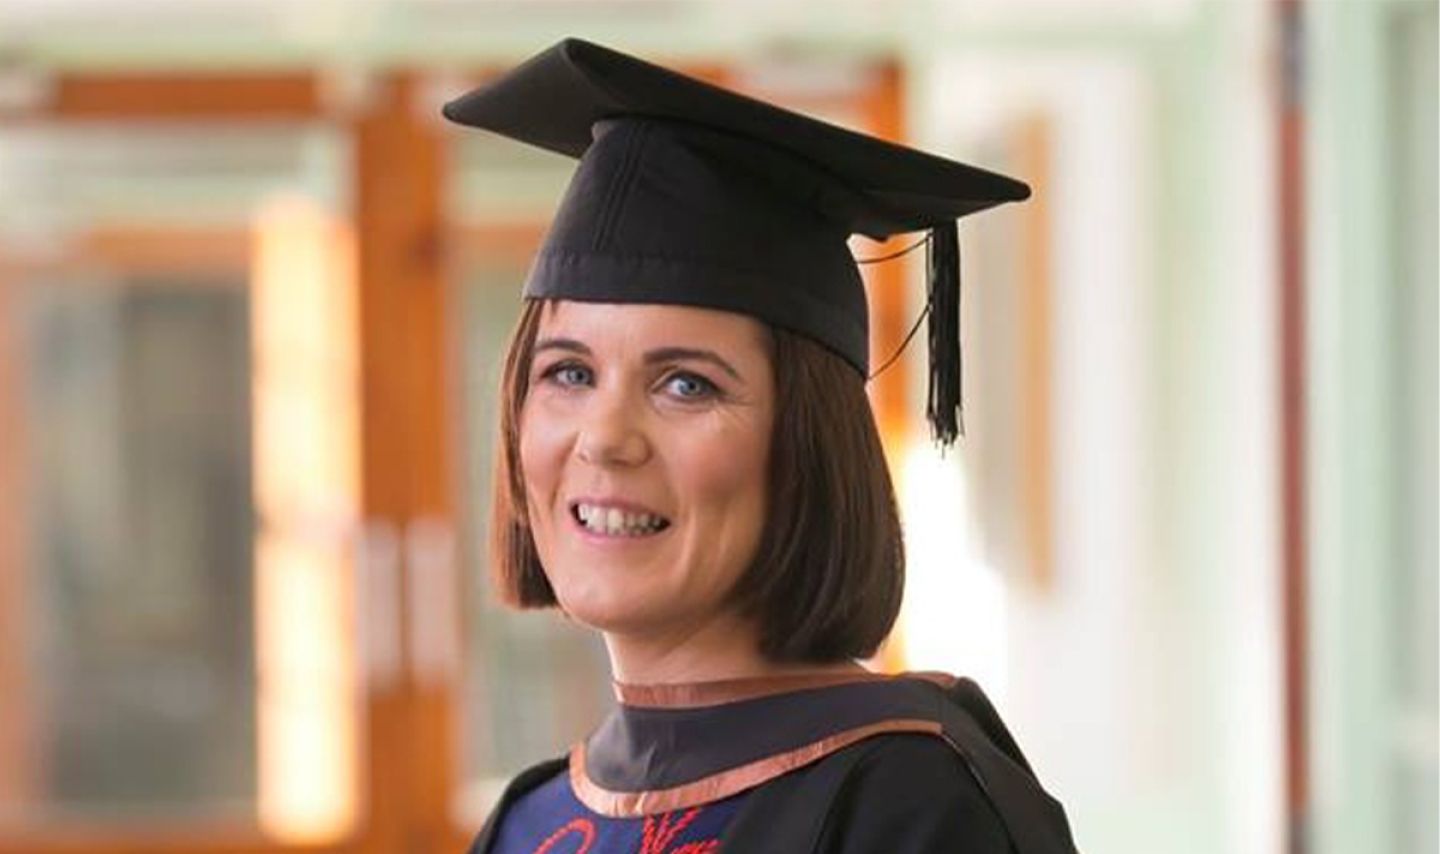 SETU graduate Madeline shares her story about giving university a second try